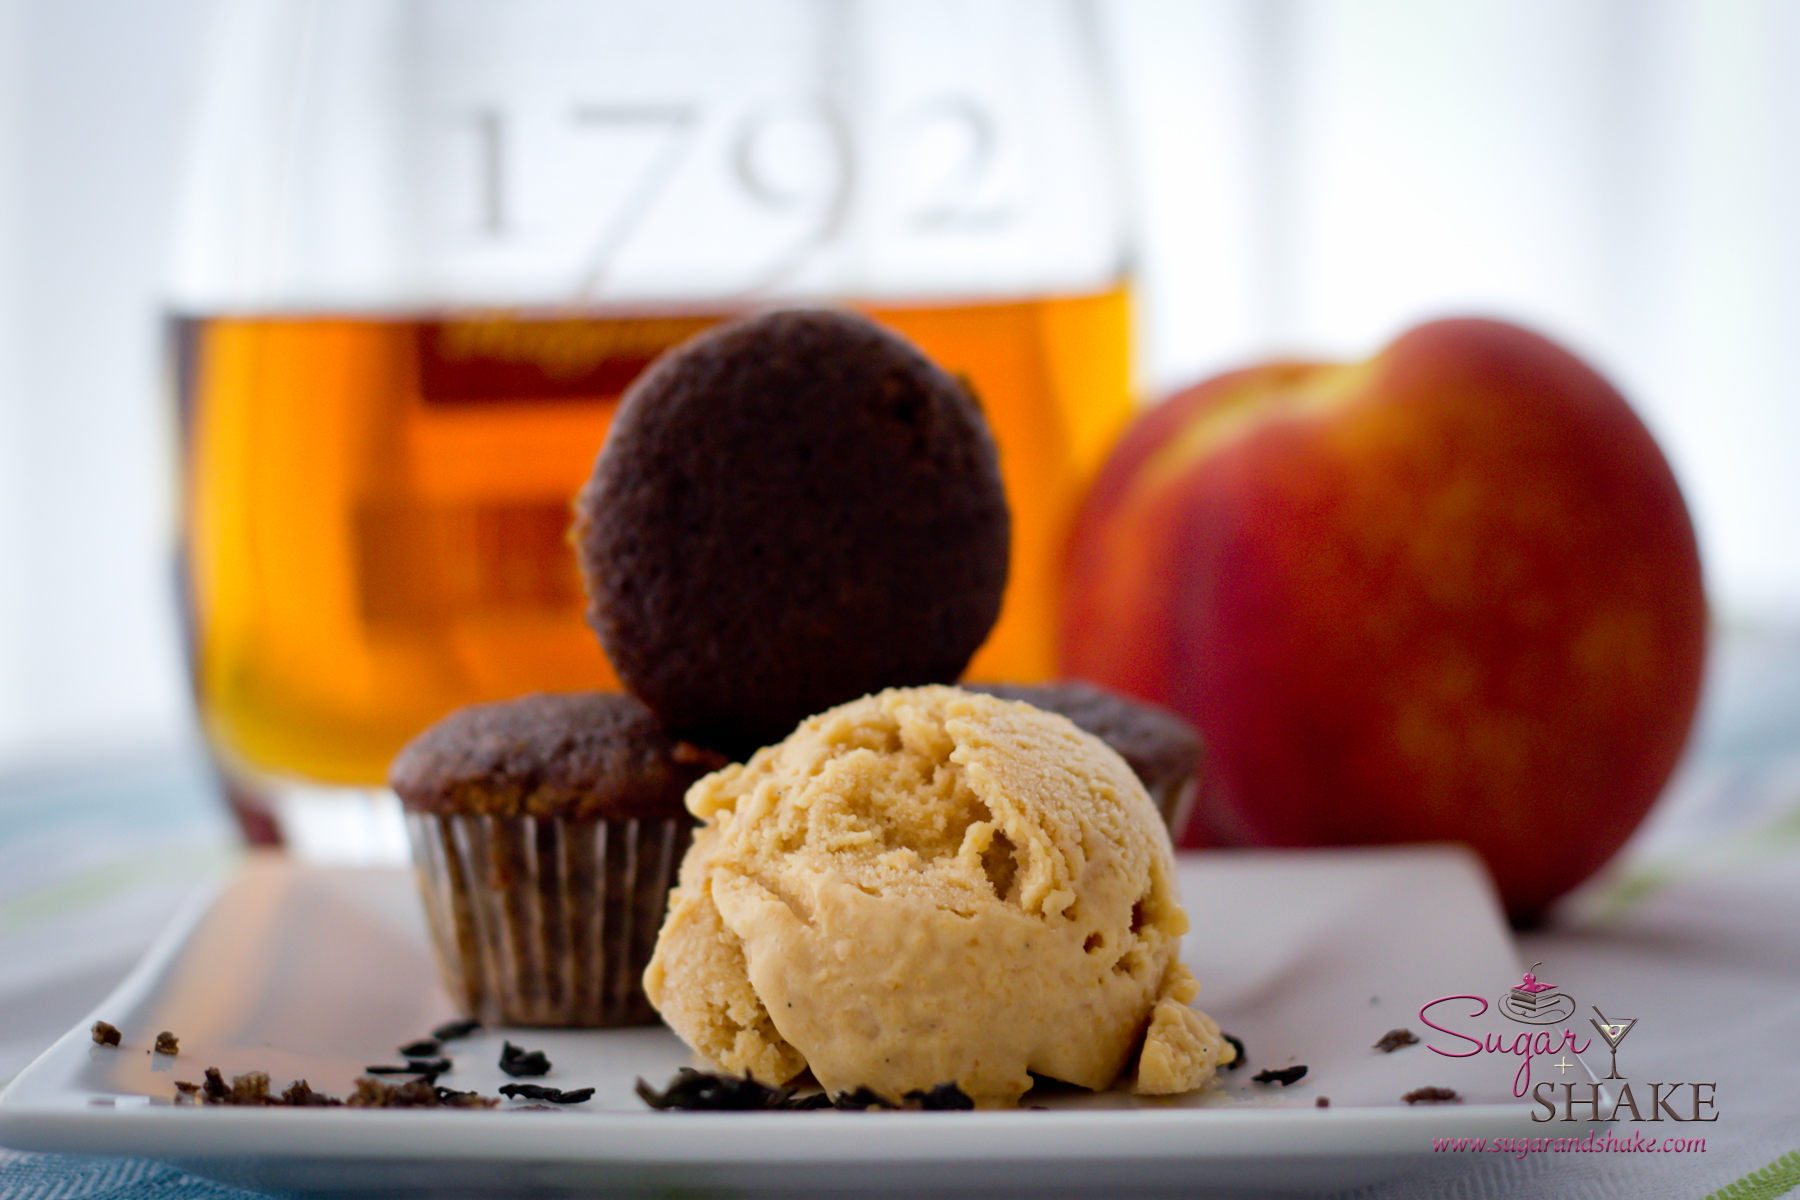 The smoky cupcakes paired nicely with homemade Bourbon-Rum Peach Ice cream.